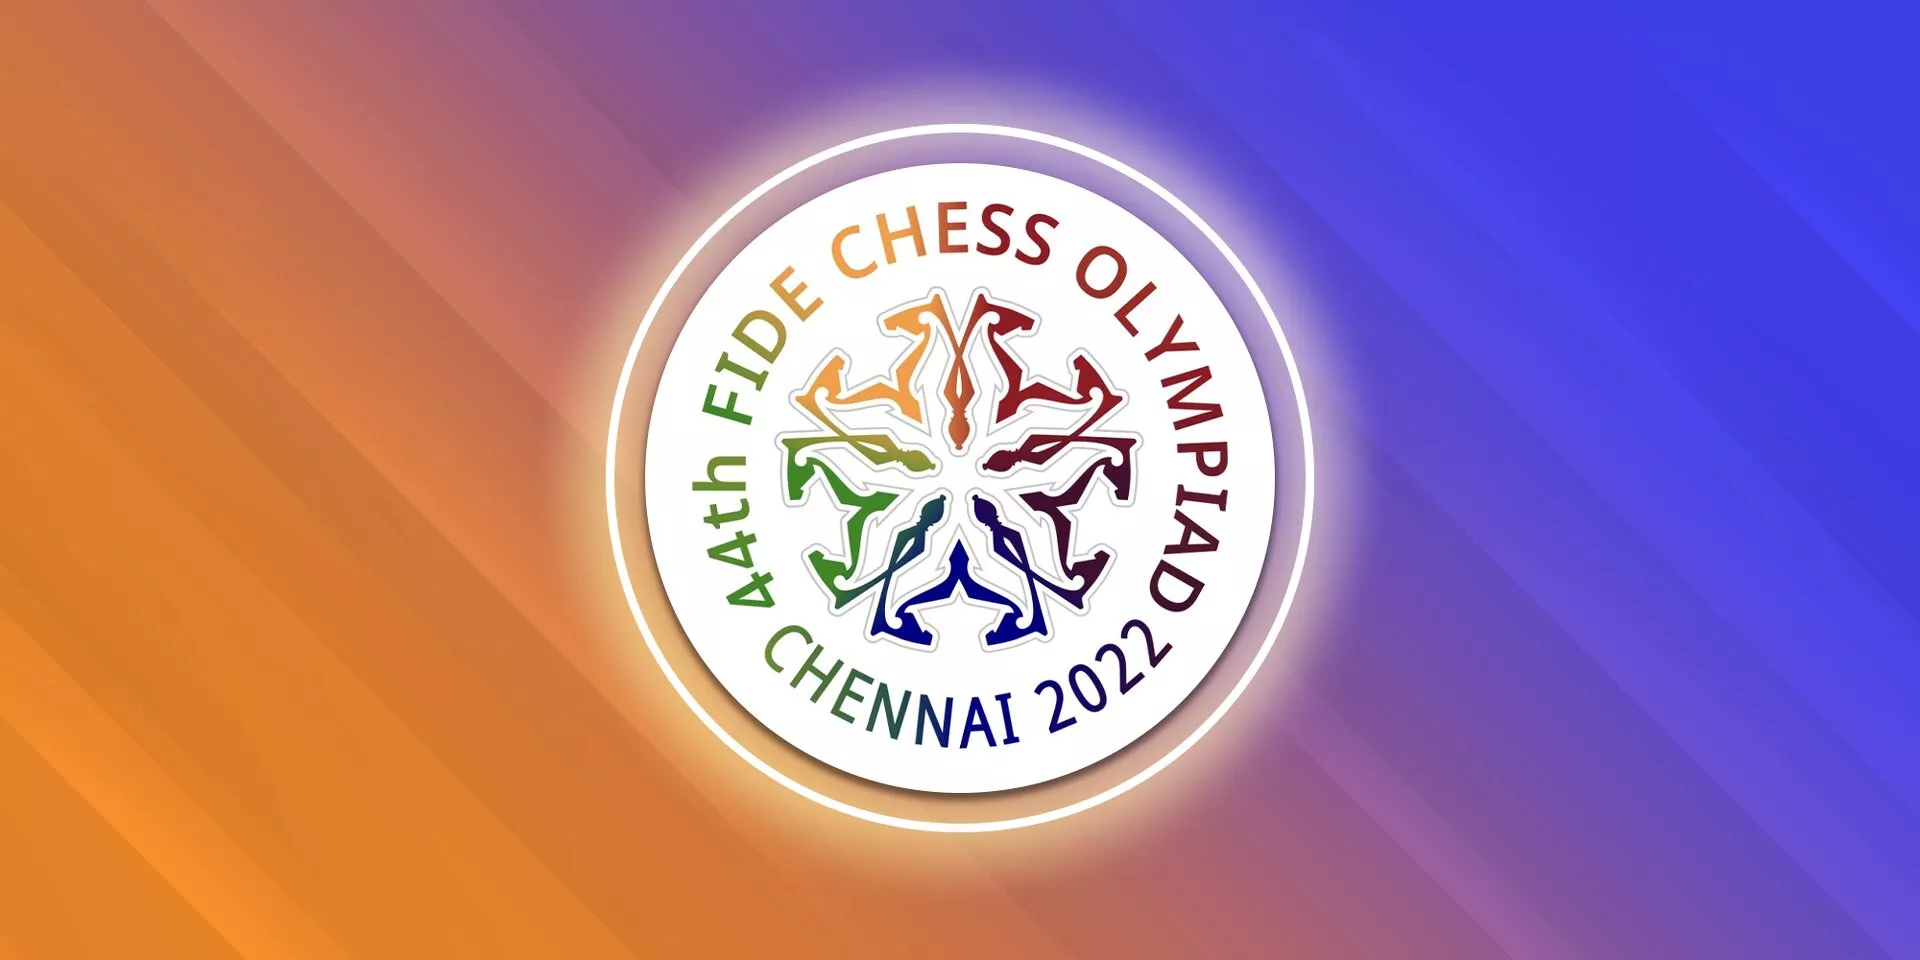 ChessBase India - The Chess Olympiad 2022 will witness a